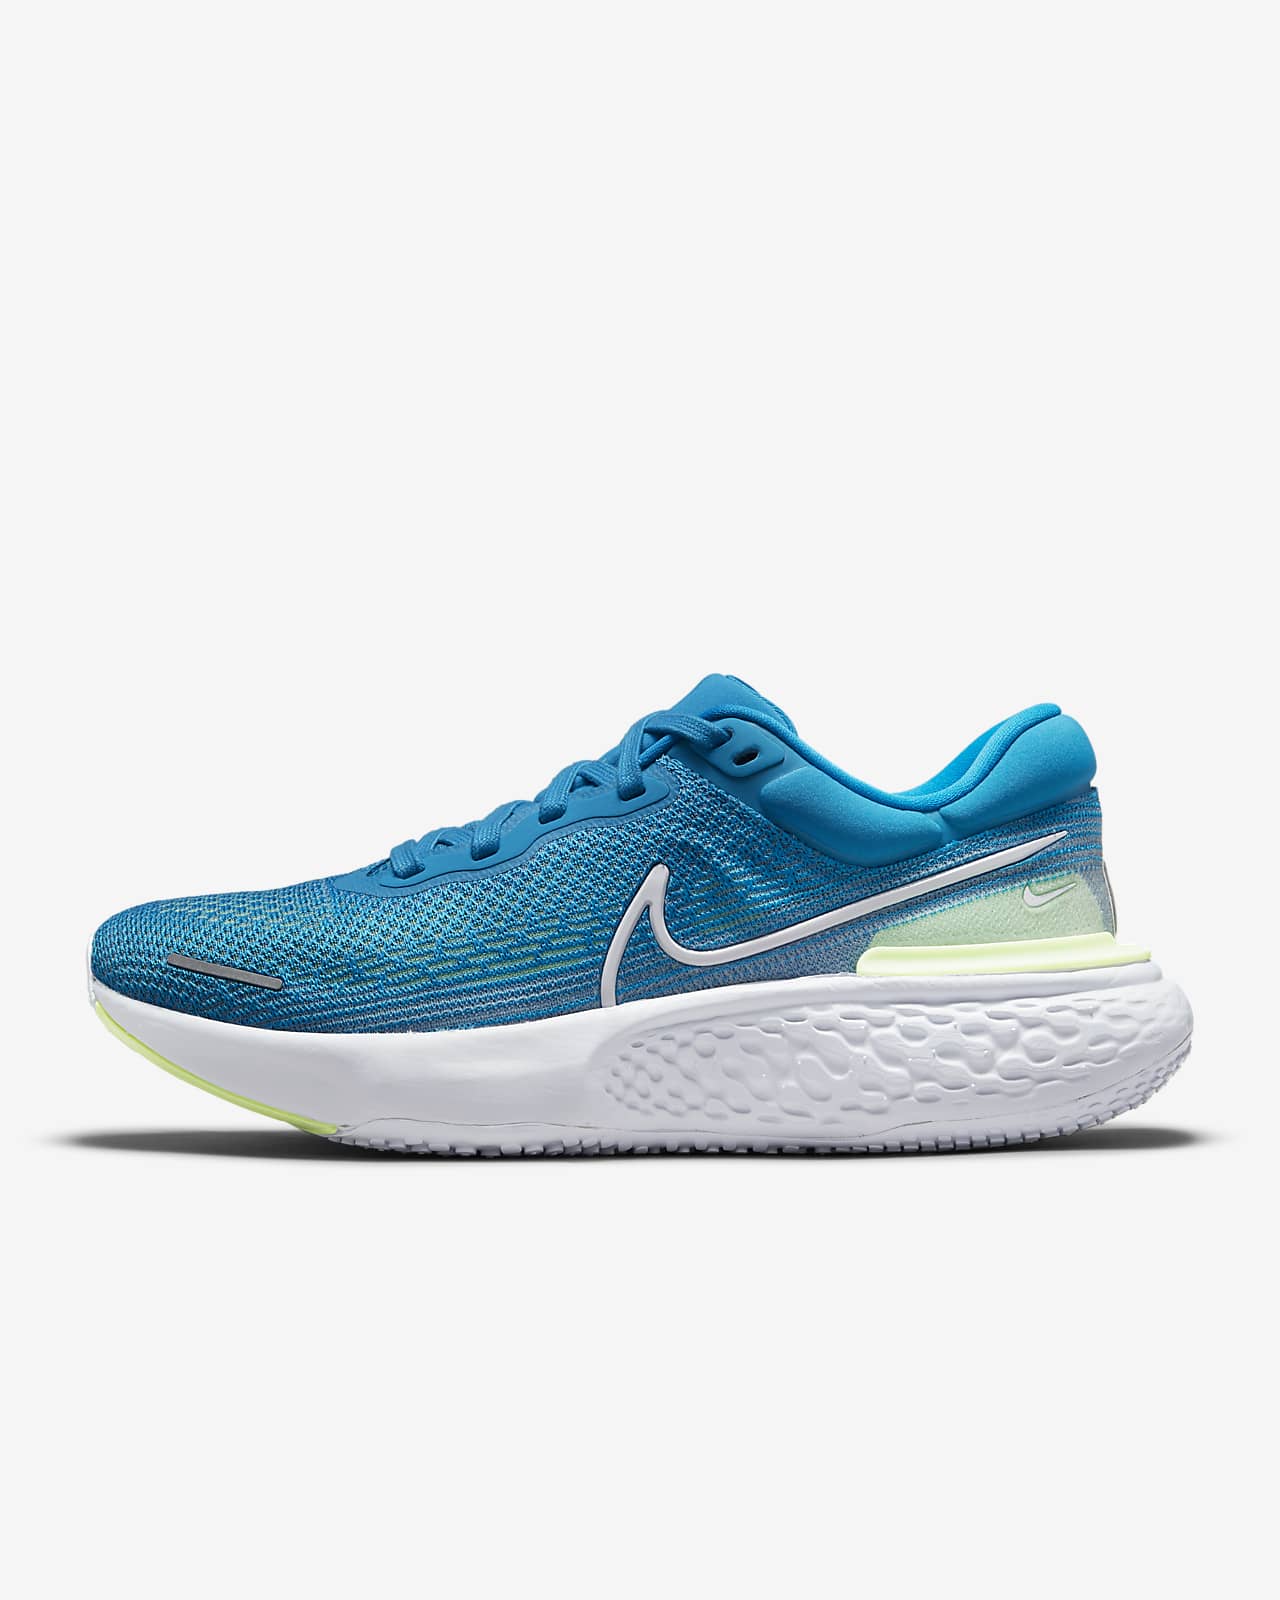 where to buy nike running shoes near me